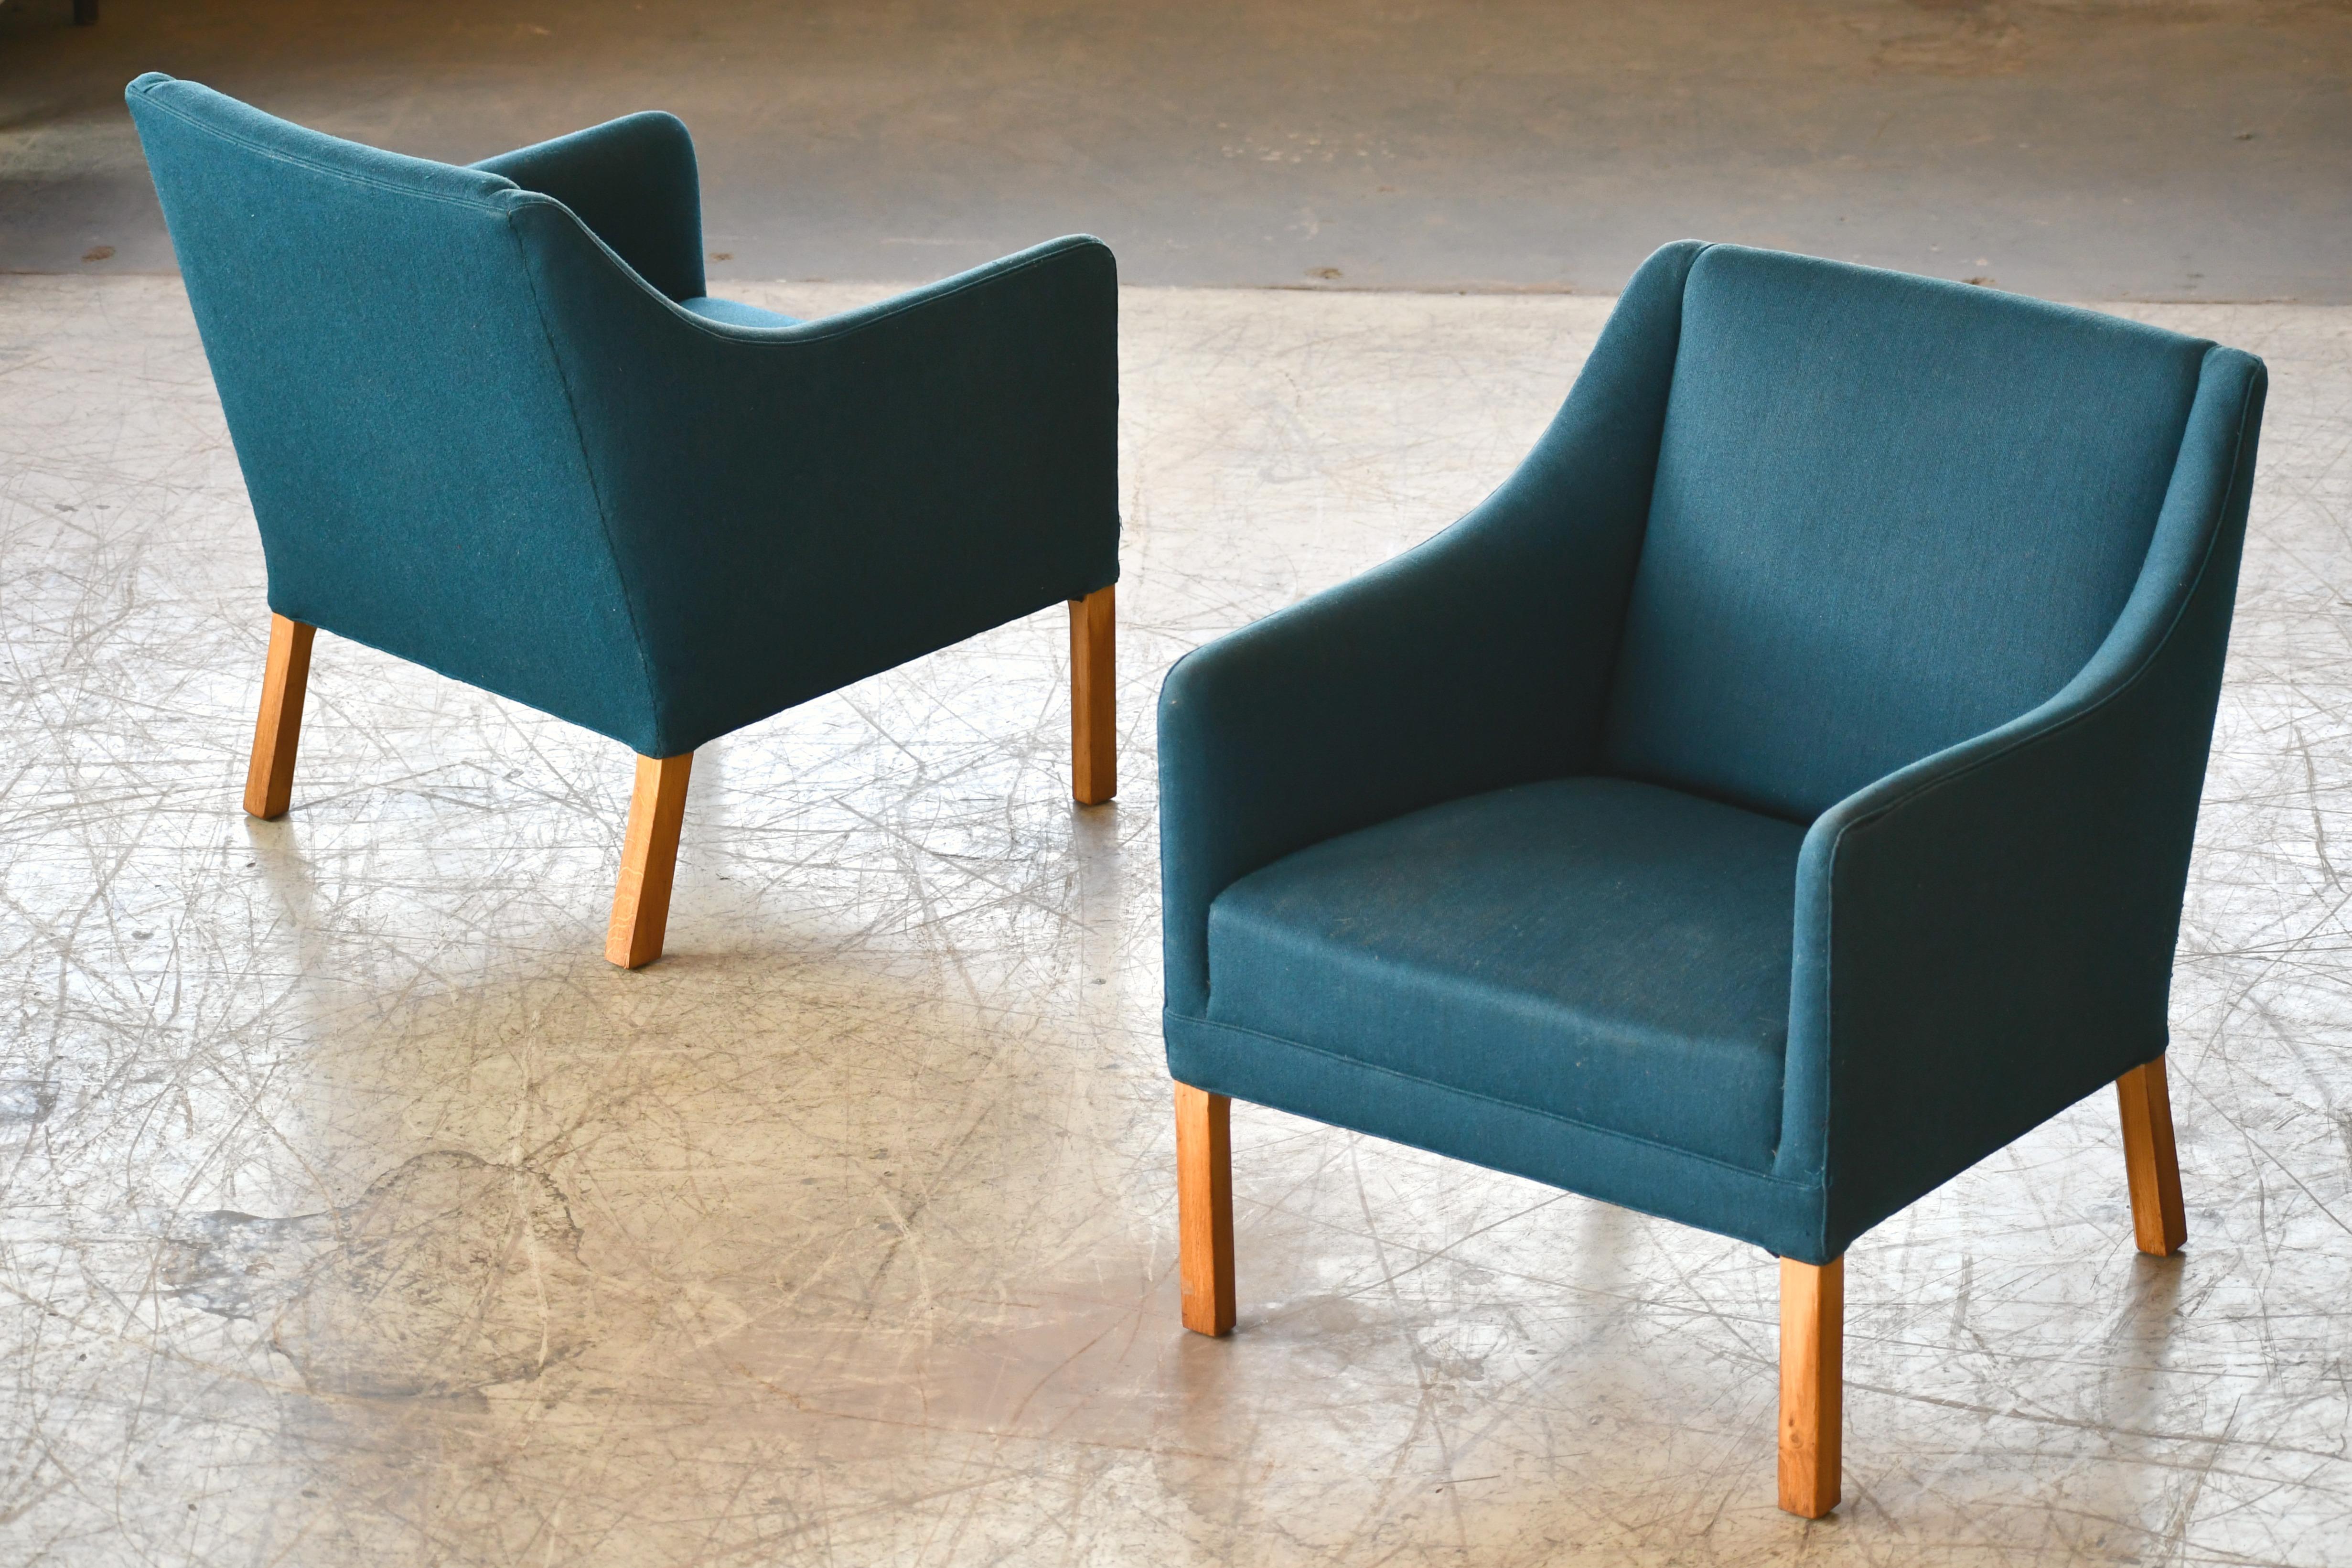 Elegant pair of Classic Danish lounge chairs attributed to the famous design duo Ejnar Larsen & Axel Bender Madsen. Simple yet refined lines raised on legs of solid oak. Solid and sturdy and in overall very good condition with the wool fabric in